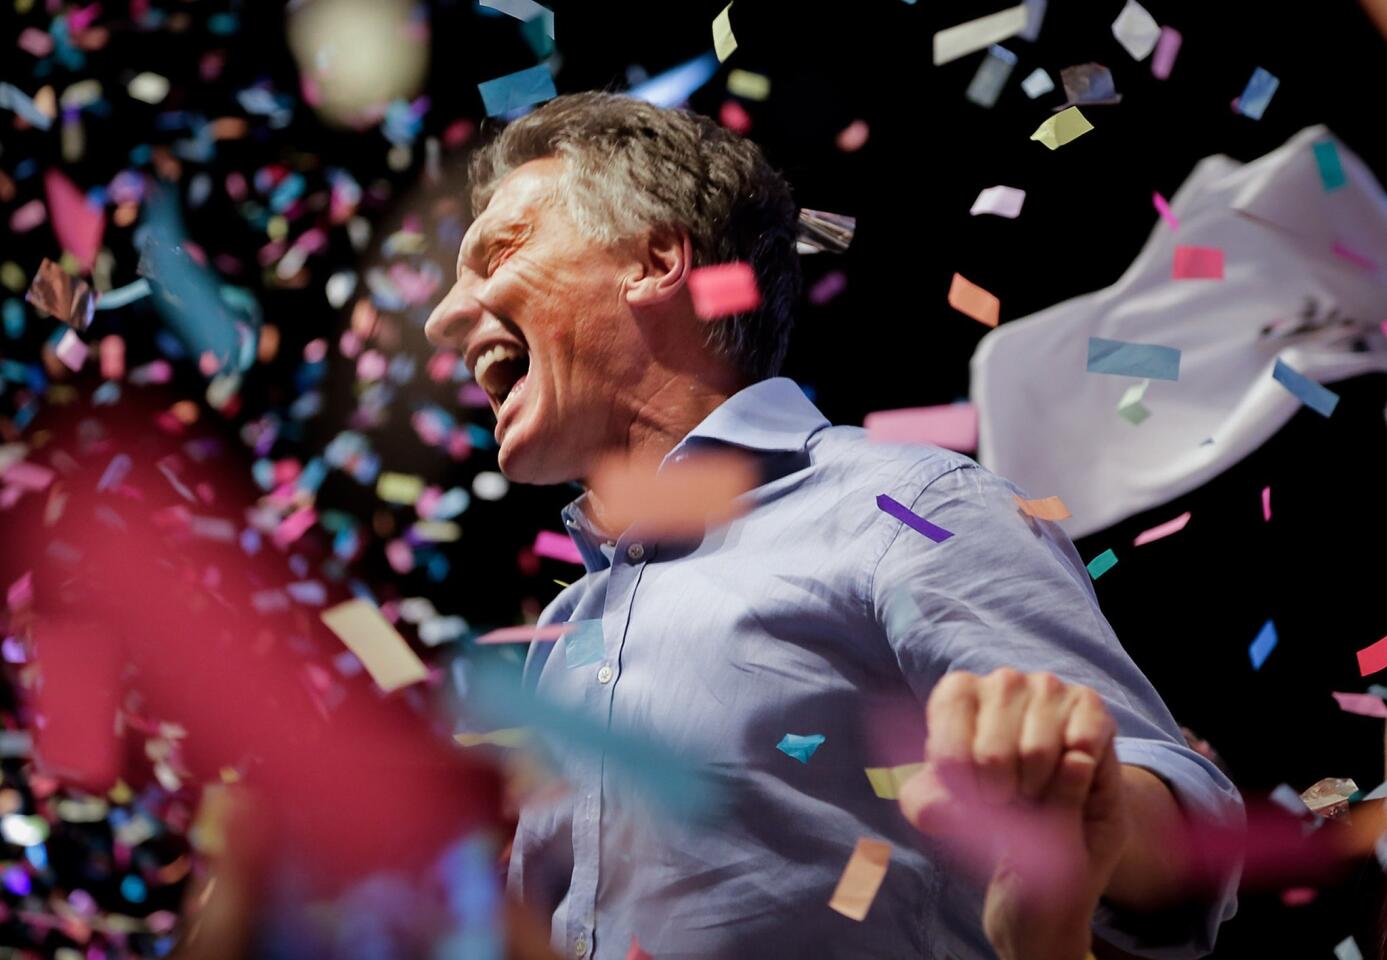 Mauricio Macri celebrates at the Cambiemos (Let's Change) party headquarters in Buenos Aires, after getting early results of the presidential runoff election in Argentina.